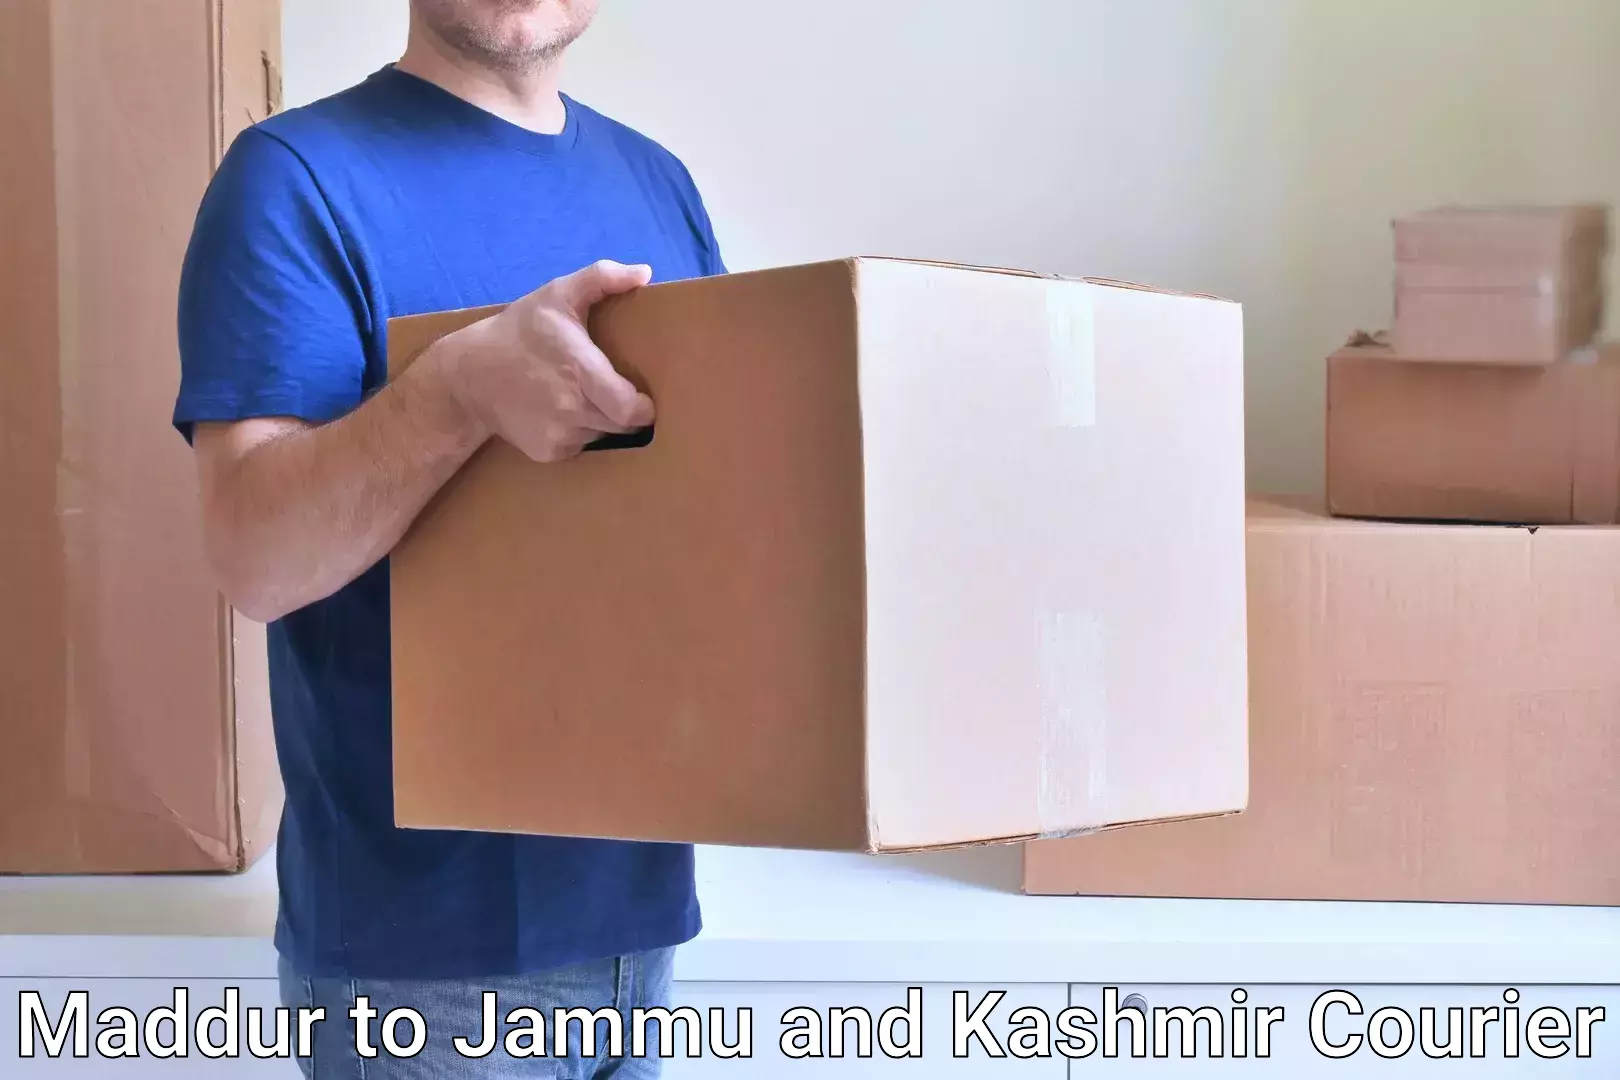 Fastest parcel delivery in Maddur to Ramban